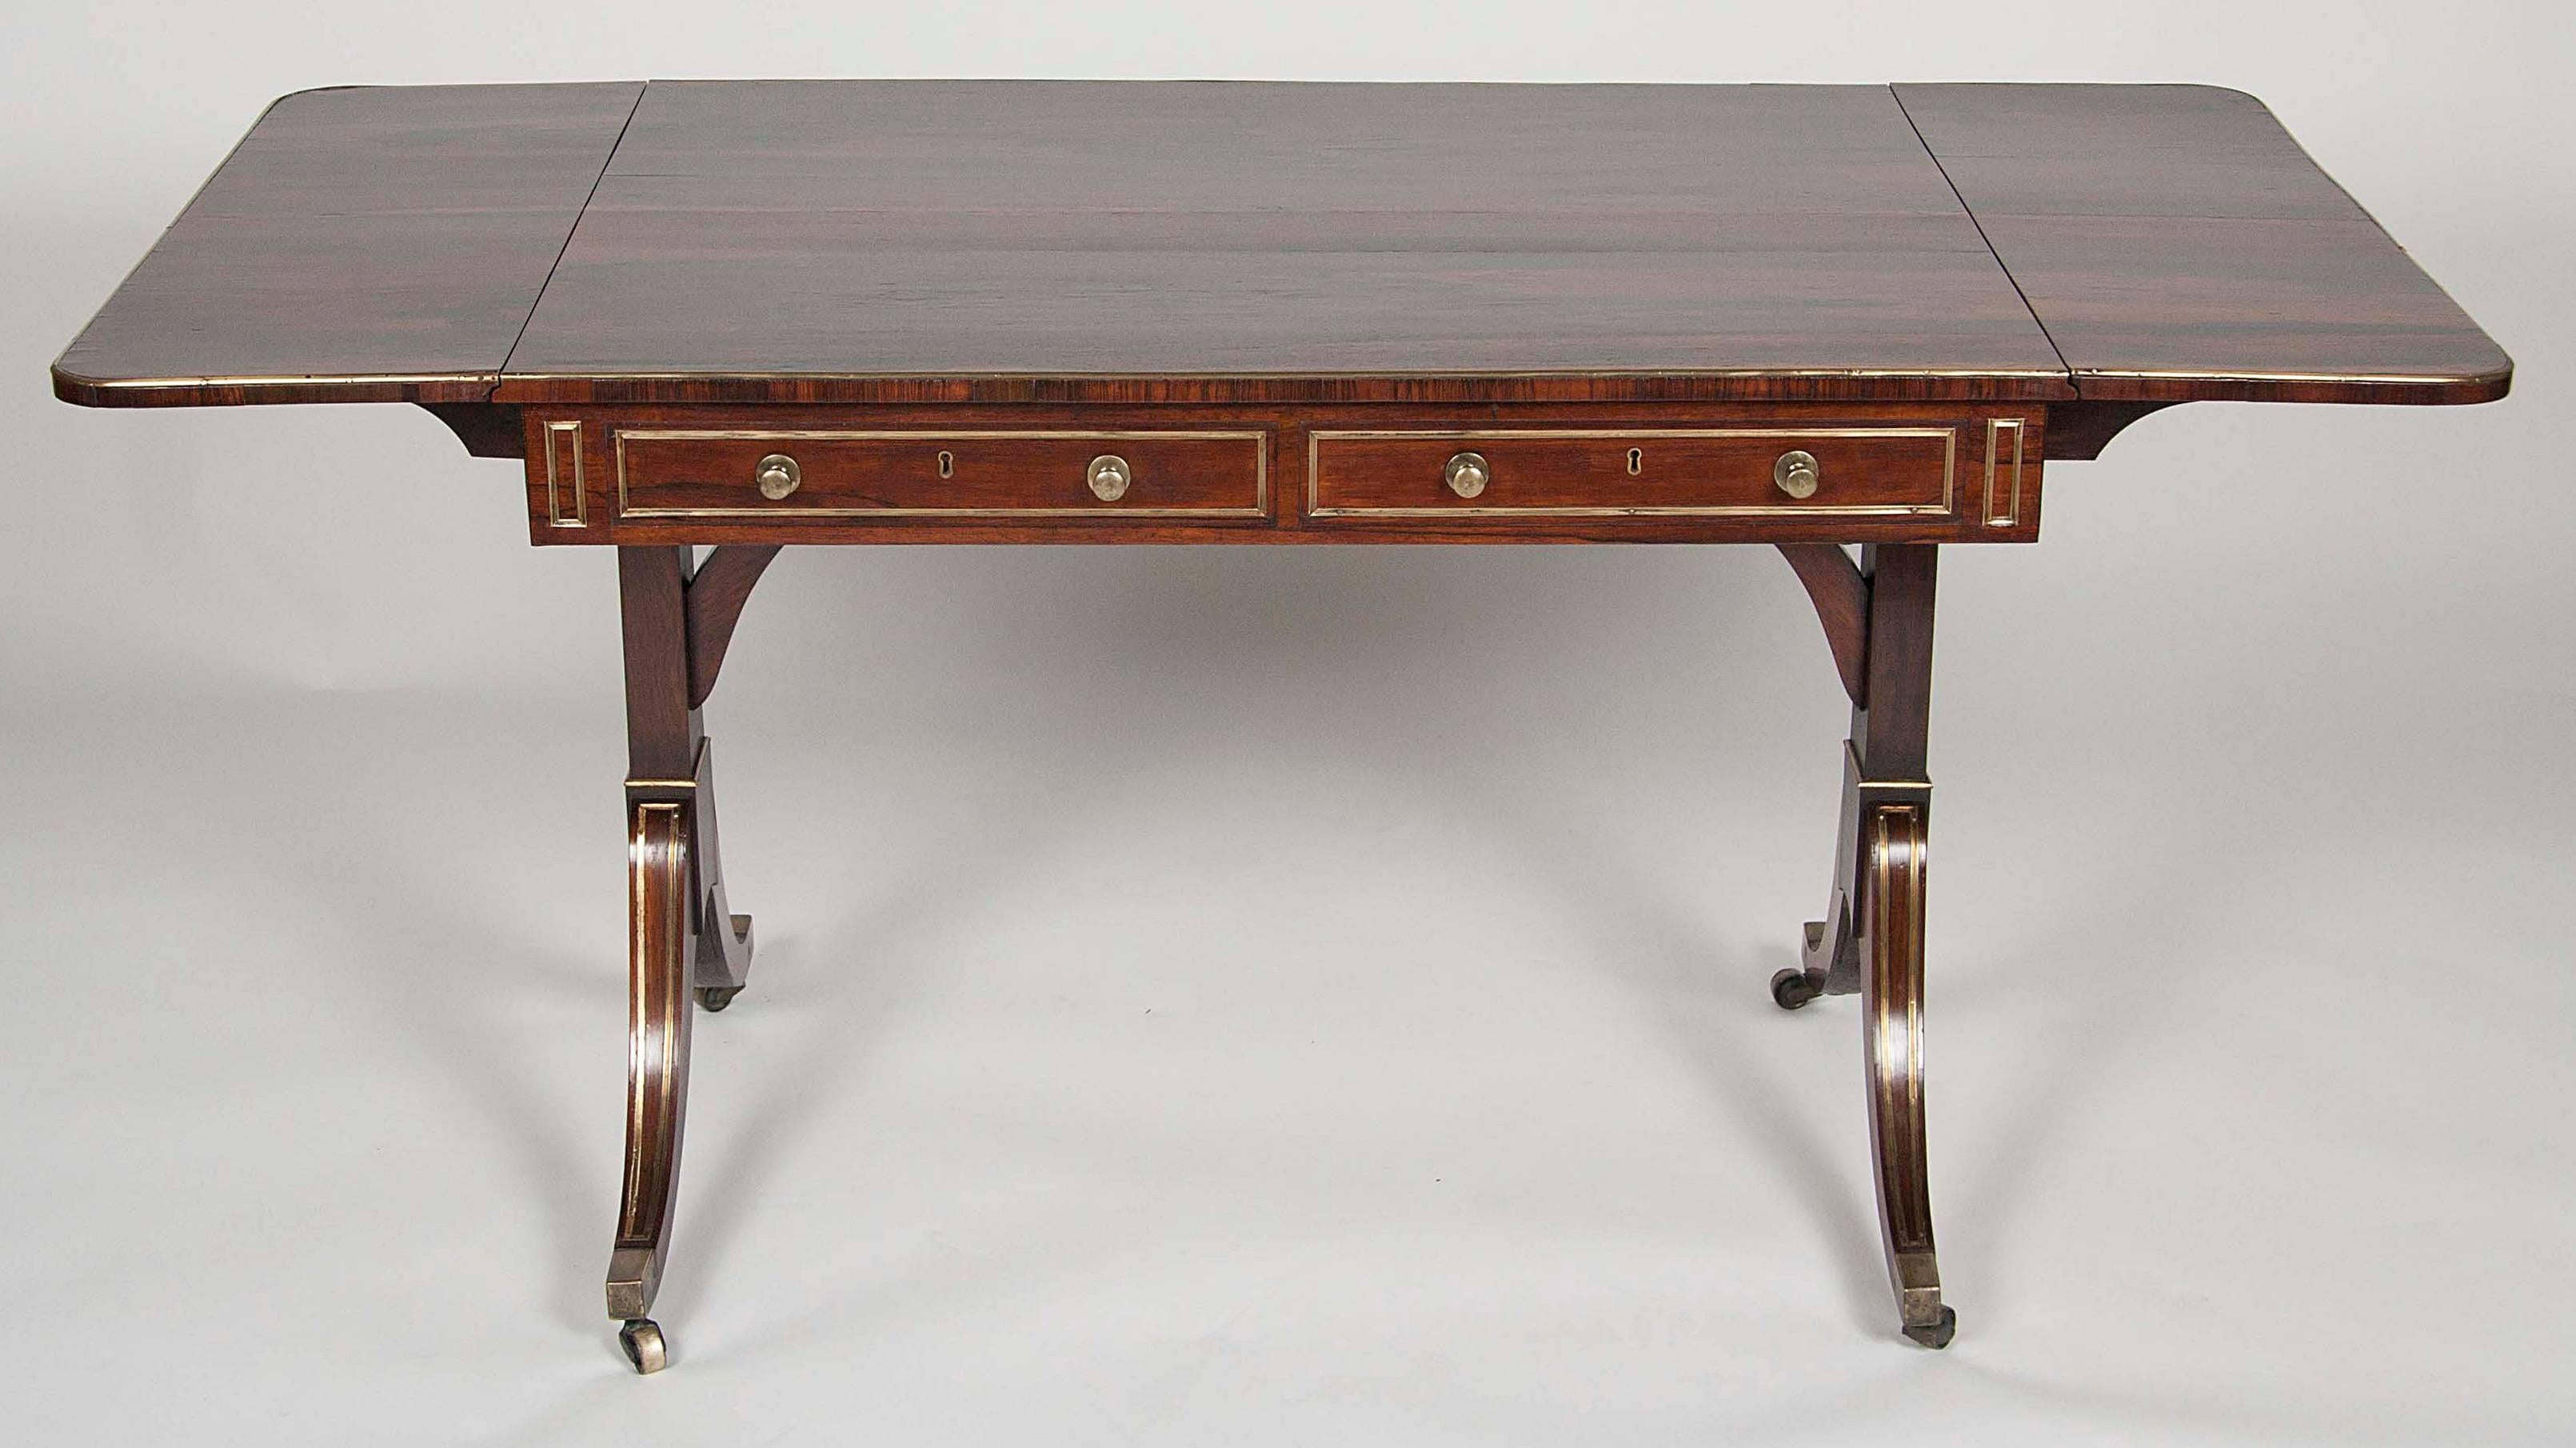 English Regency Rosewood and Brass-Mounted Sofa Table